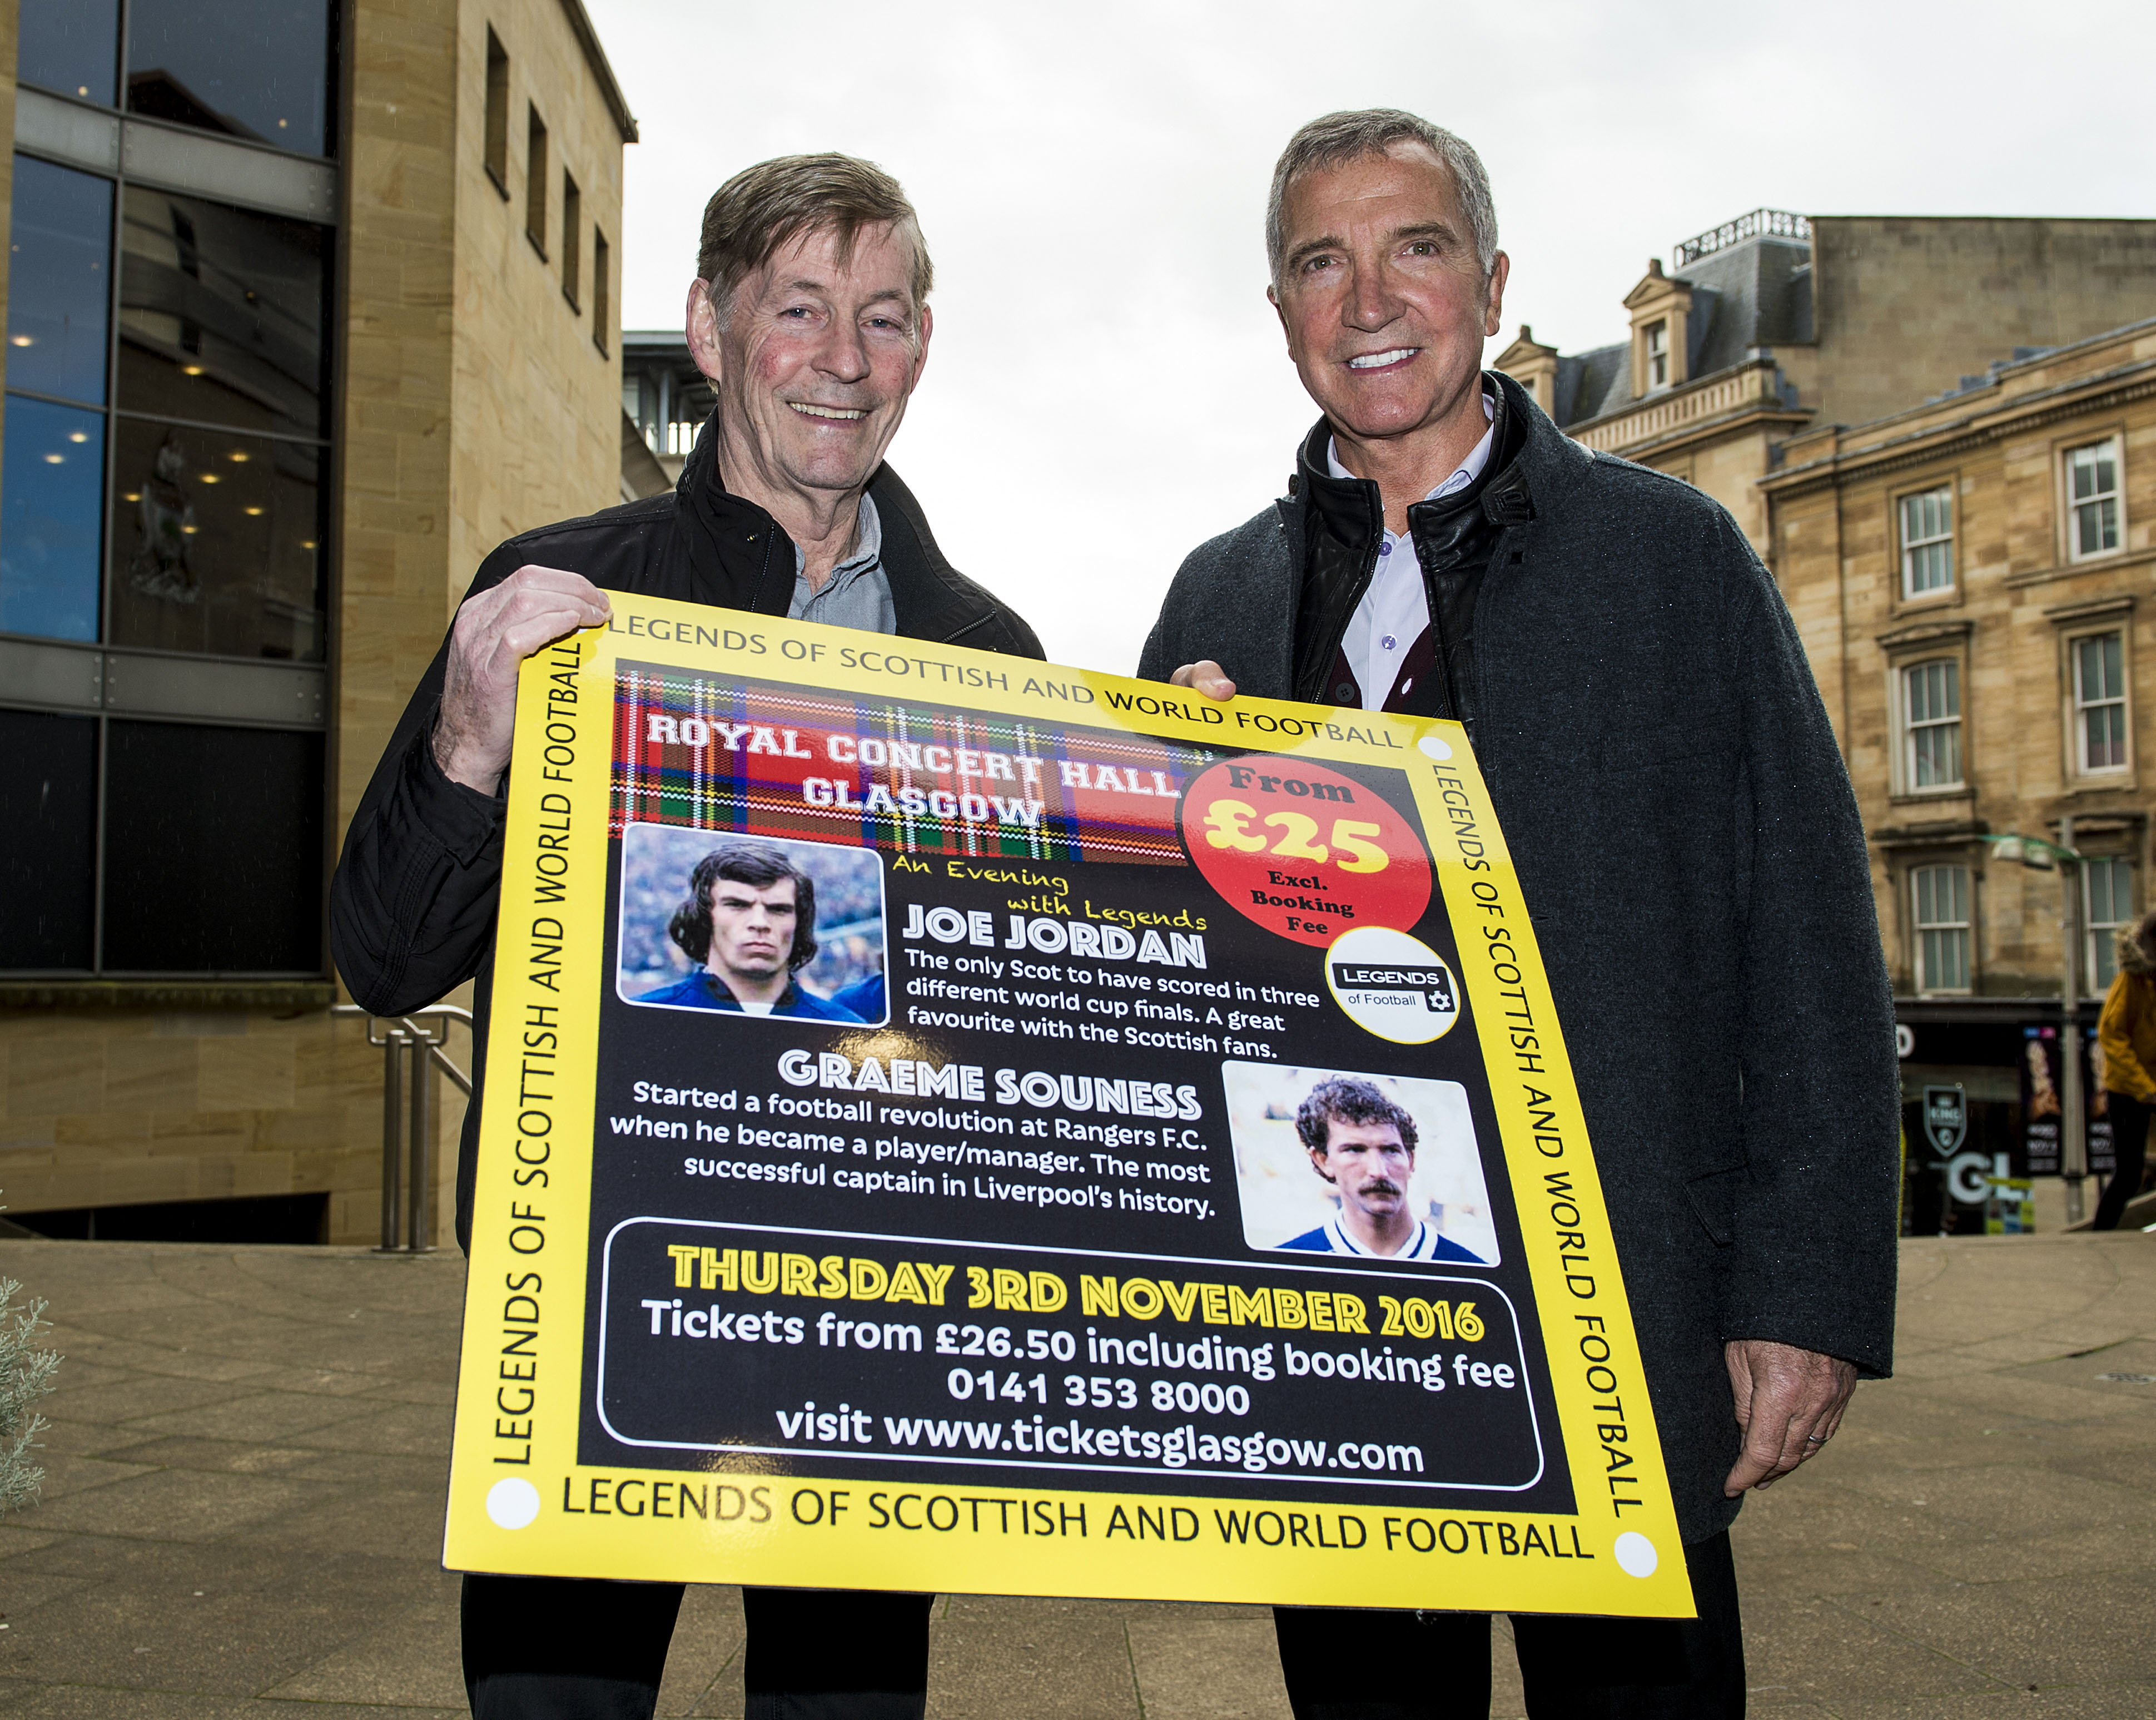 24/10/16 ROYAL CONCERT HALL - GLASGOW Jim McCalliog (left) and Graeme Souness were on hand to promote the inaugural Legends of Football event.